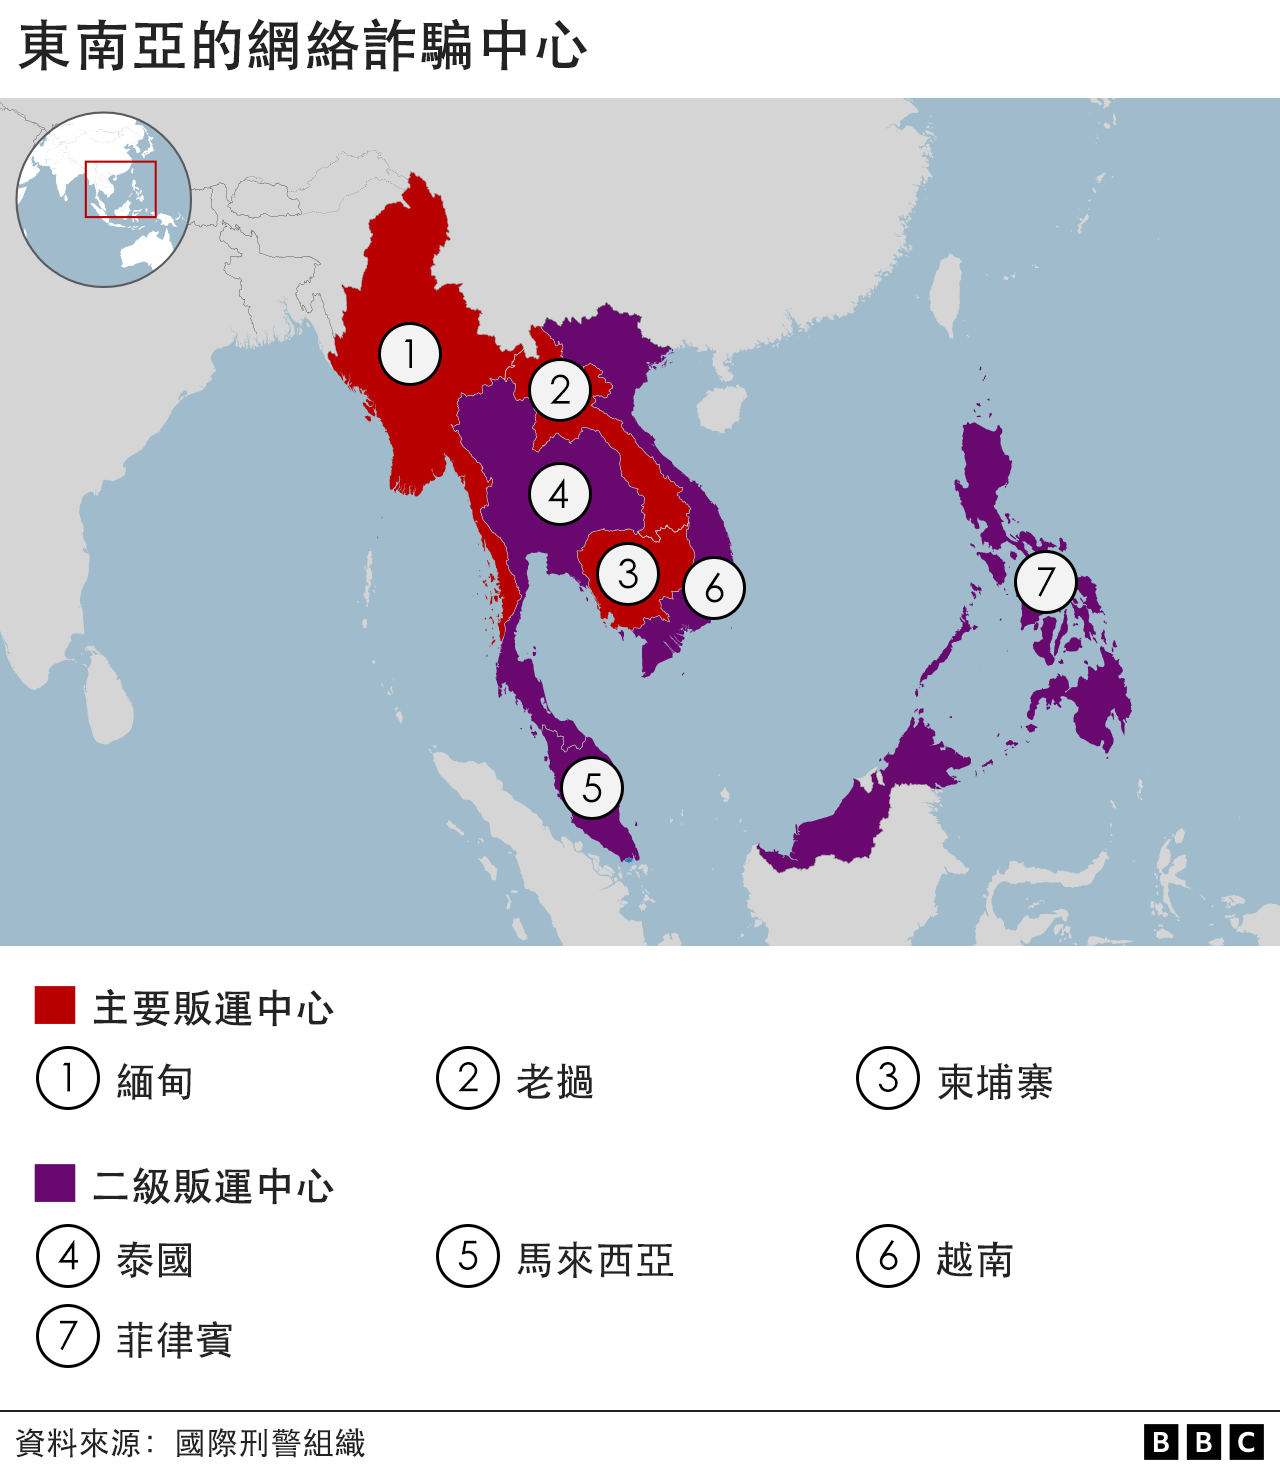 The countries involved in online scam hubs in Southeast Asia include Myanmar, Laos, Cambodia, the Philippines, Malaysia, Thailand, and Vietnam.